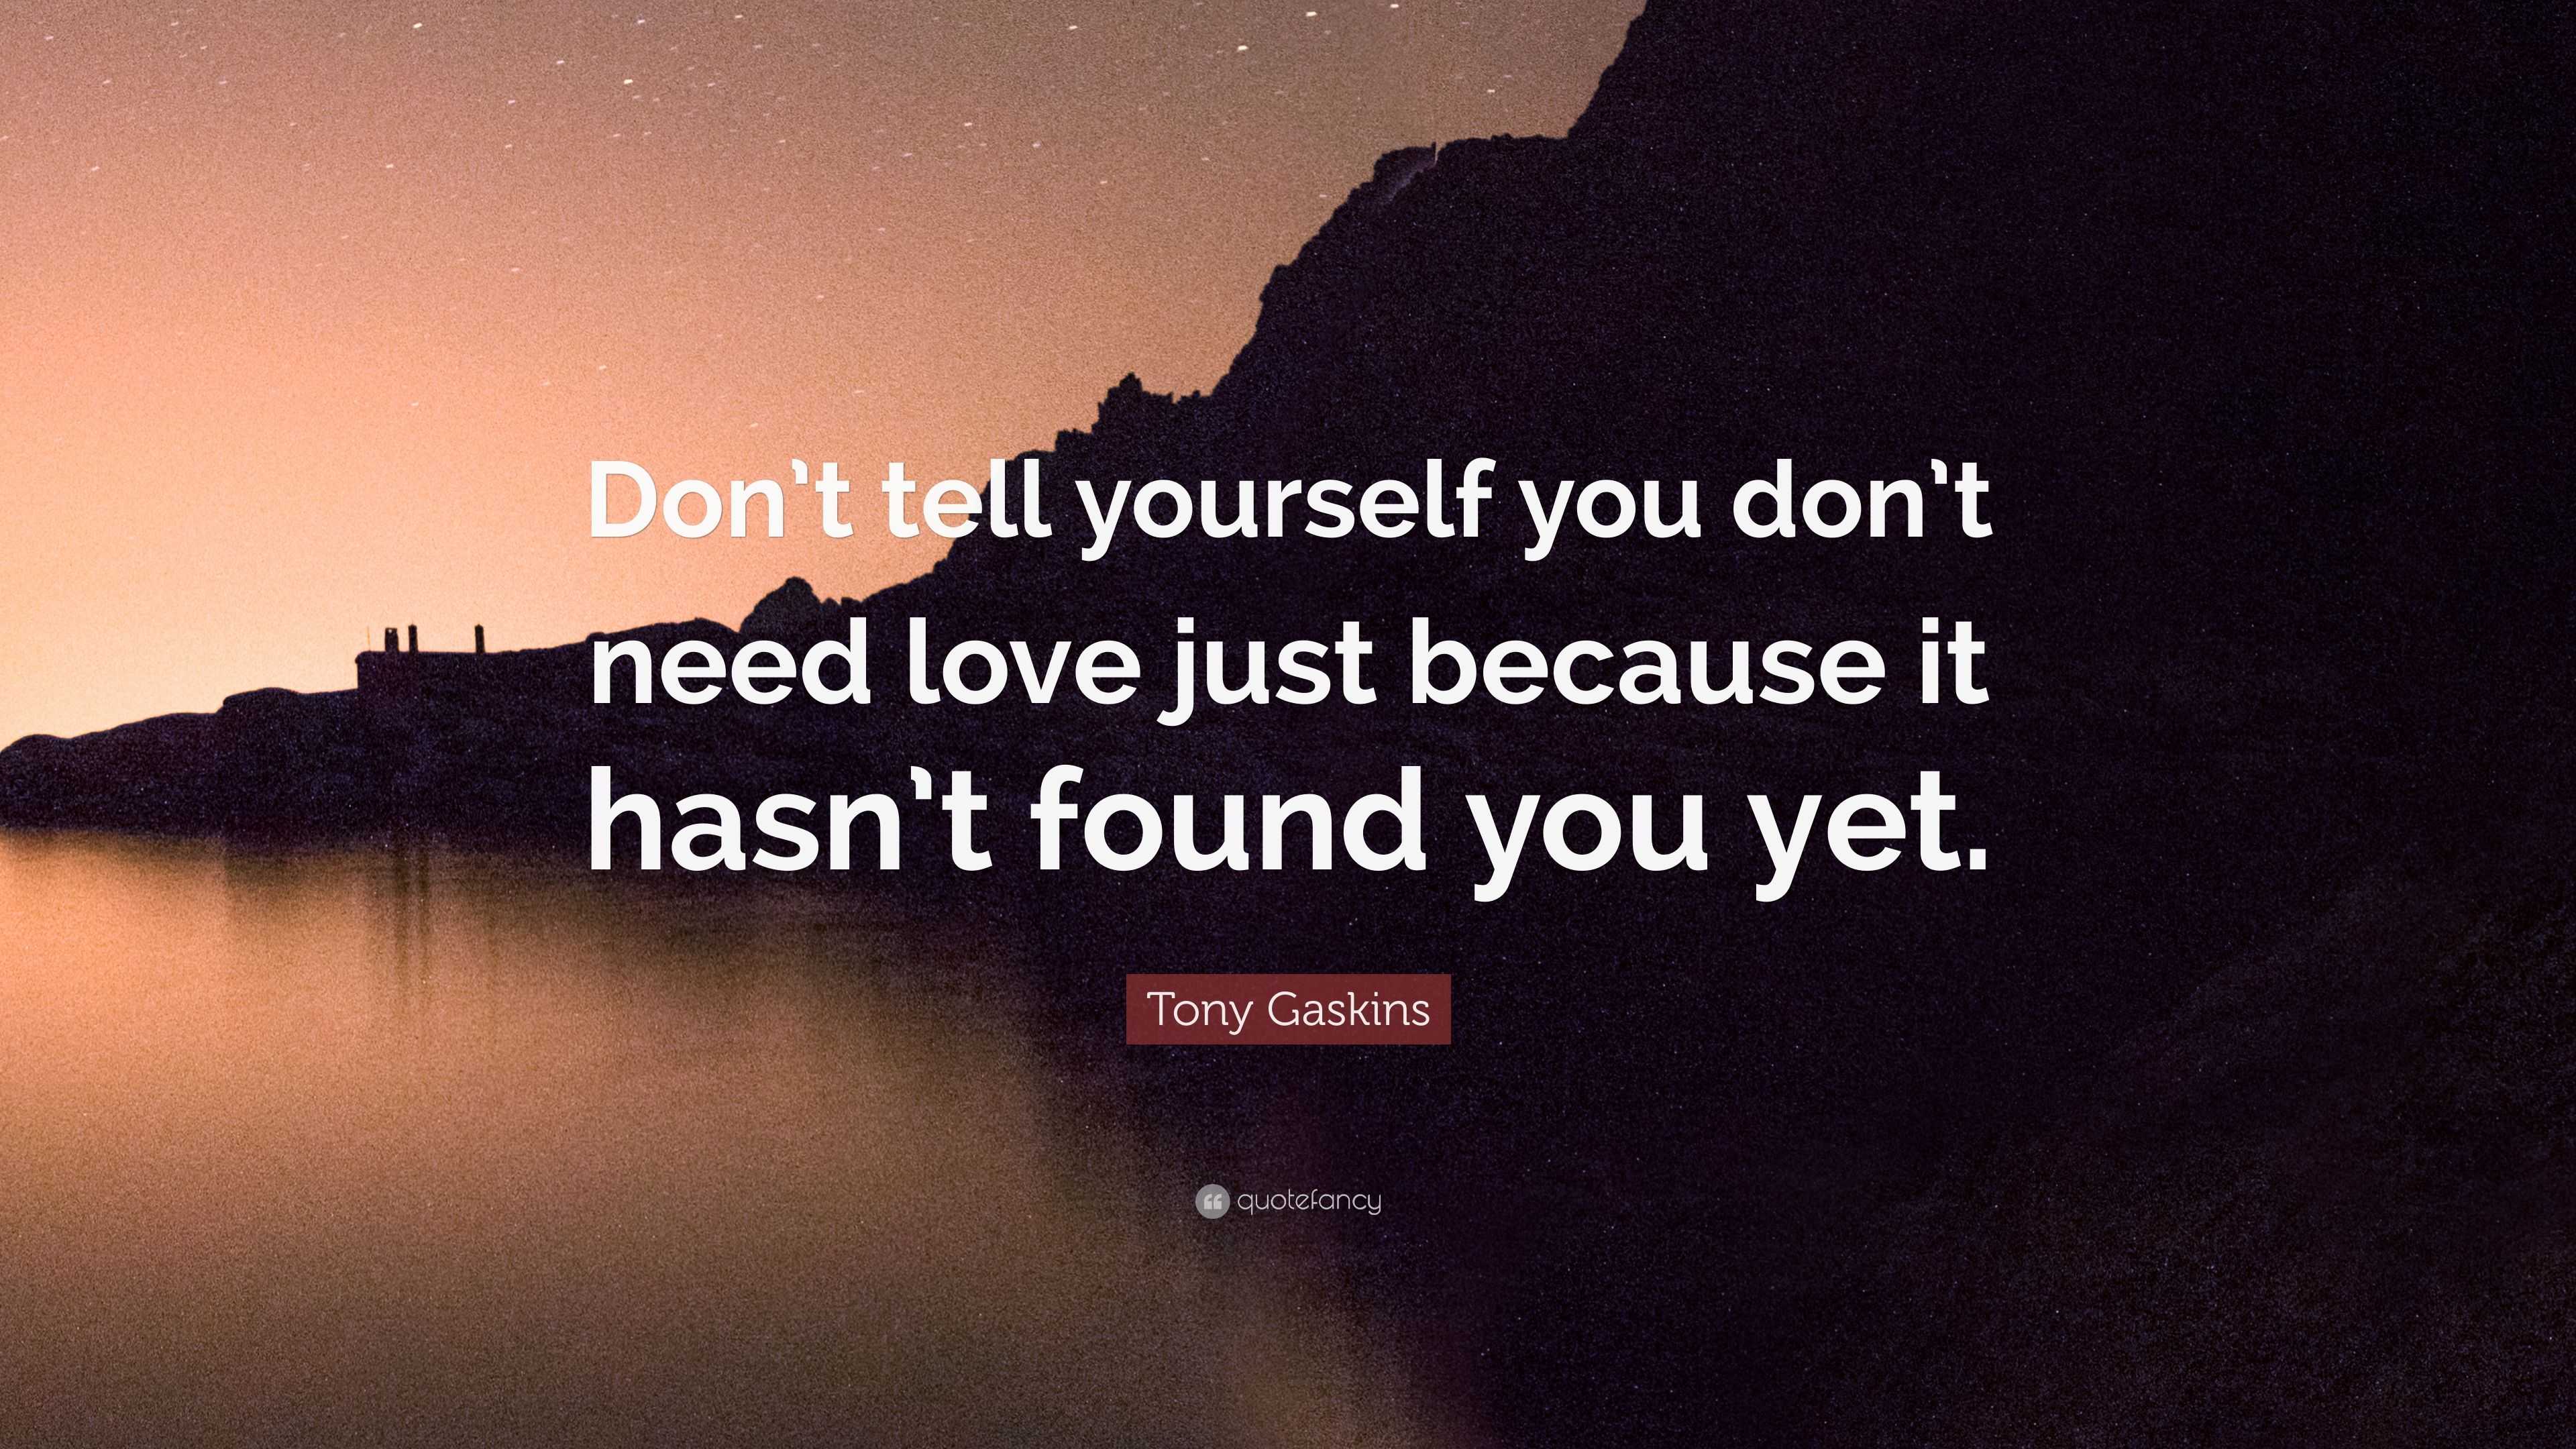 Tony Gaskins Quote: “Don’t tell yourself you don’t need love just ...